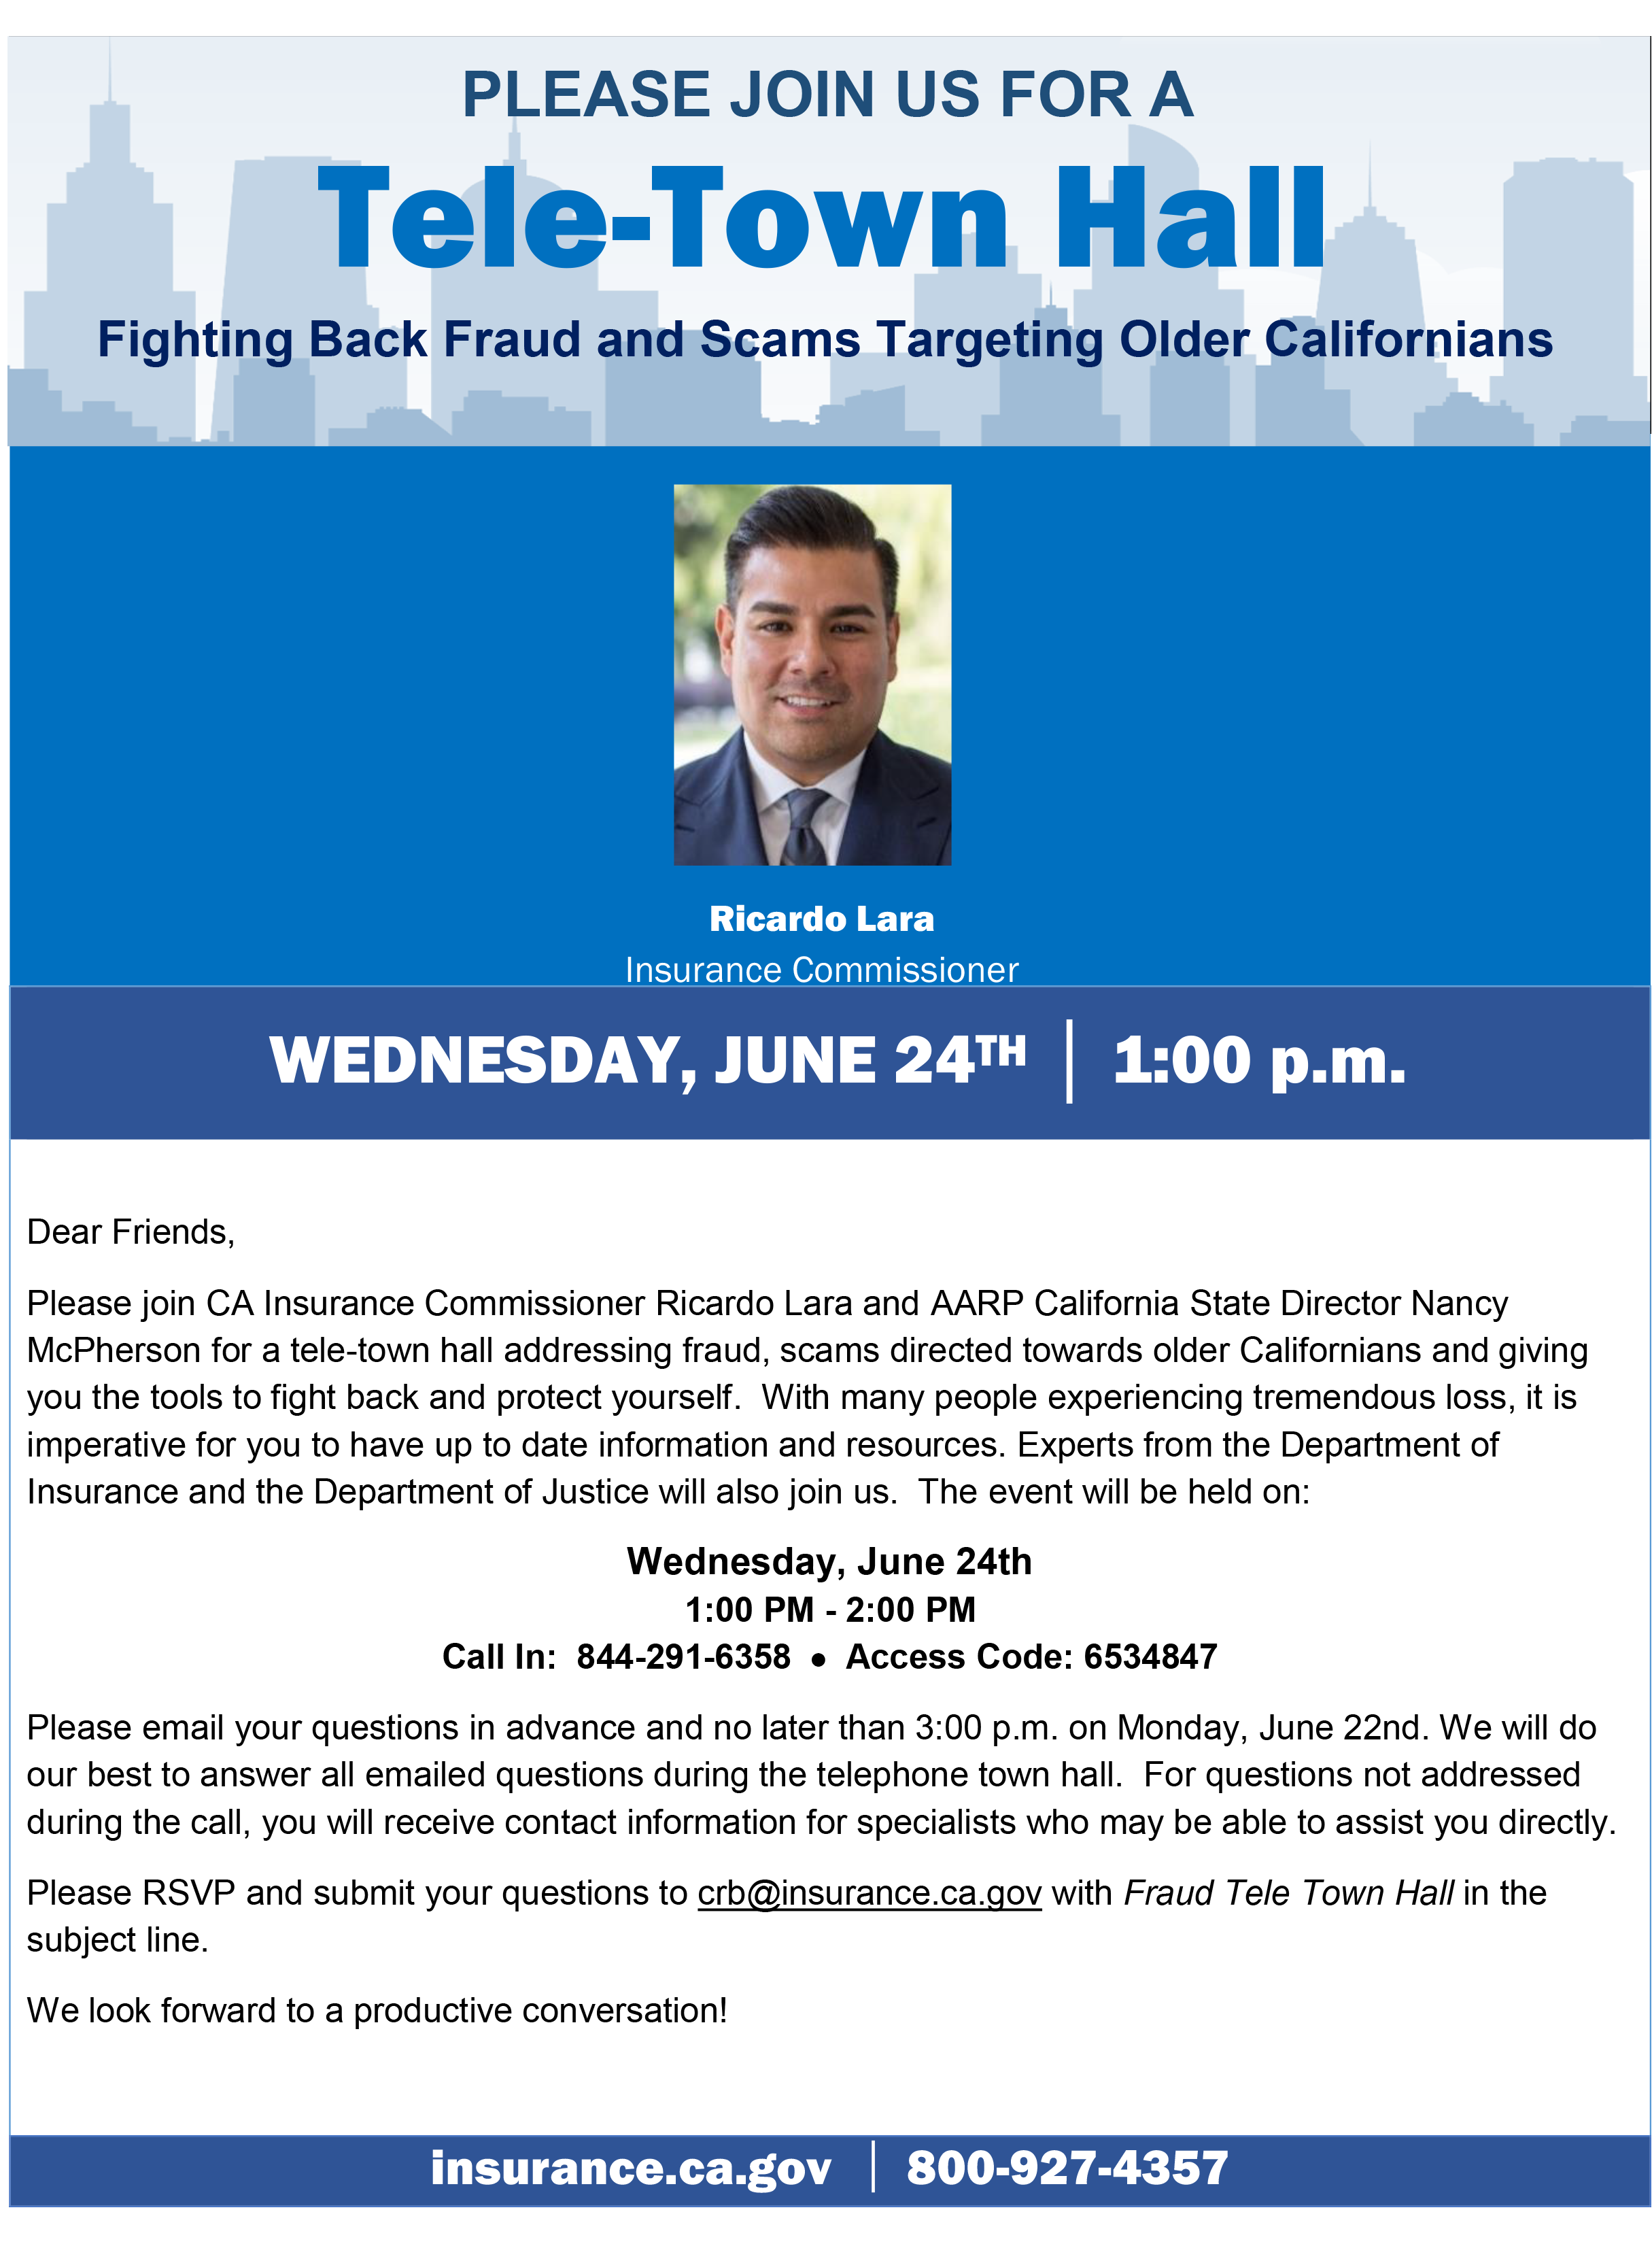 Please join CA Insurance Commissioner Ricardo Lara and AARP California State Director Nancy McPherson for a tele-town hall addressing fraud, scams directed towards older Californians and giving you the tools to fight back and protect yourself.